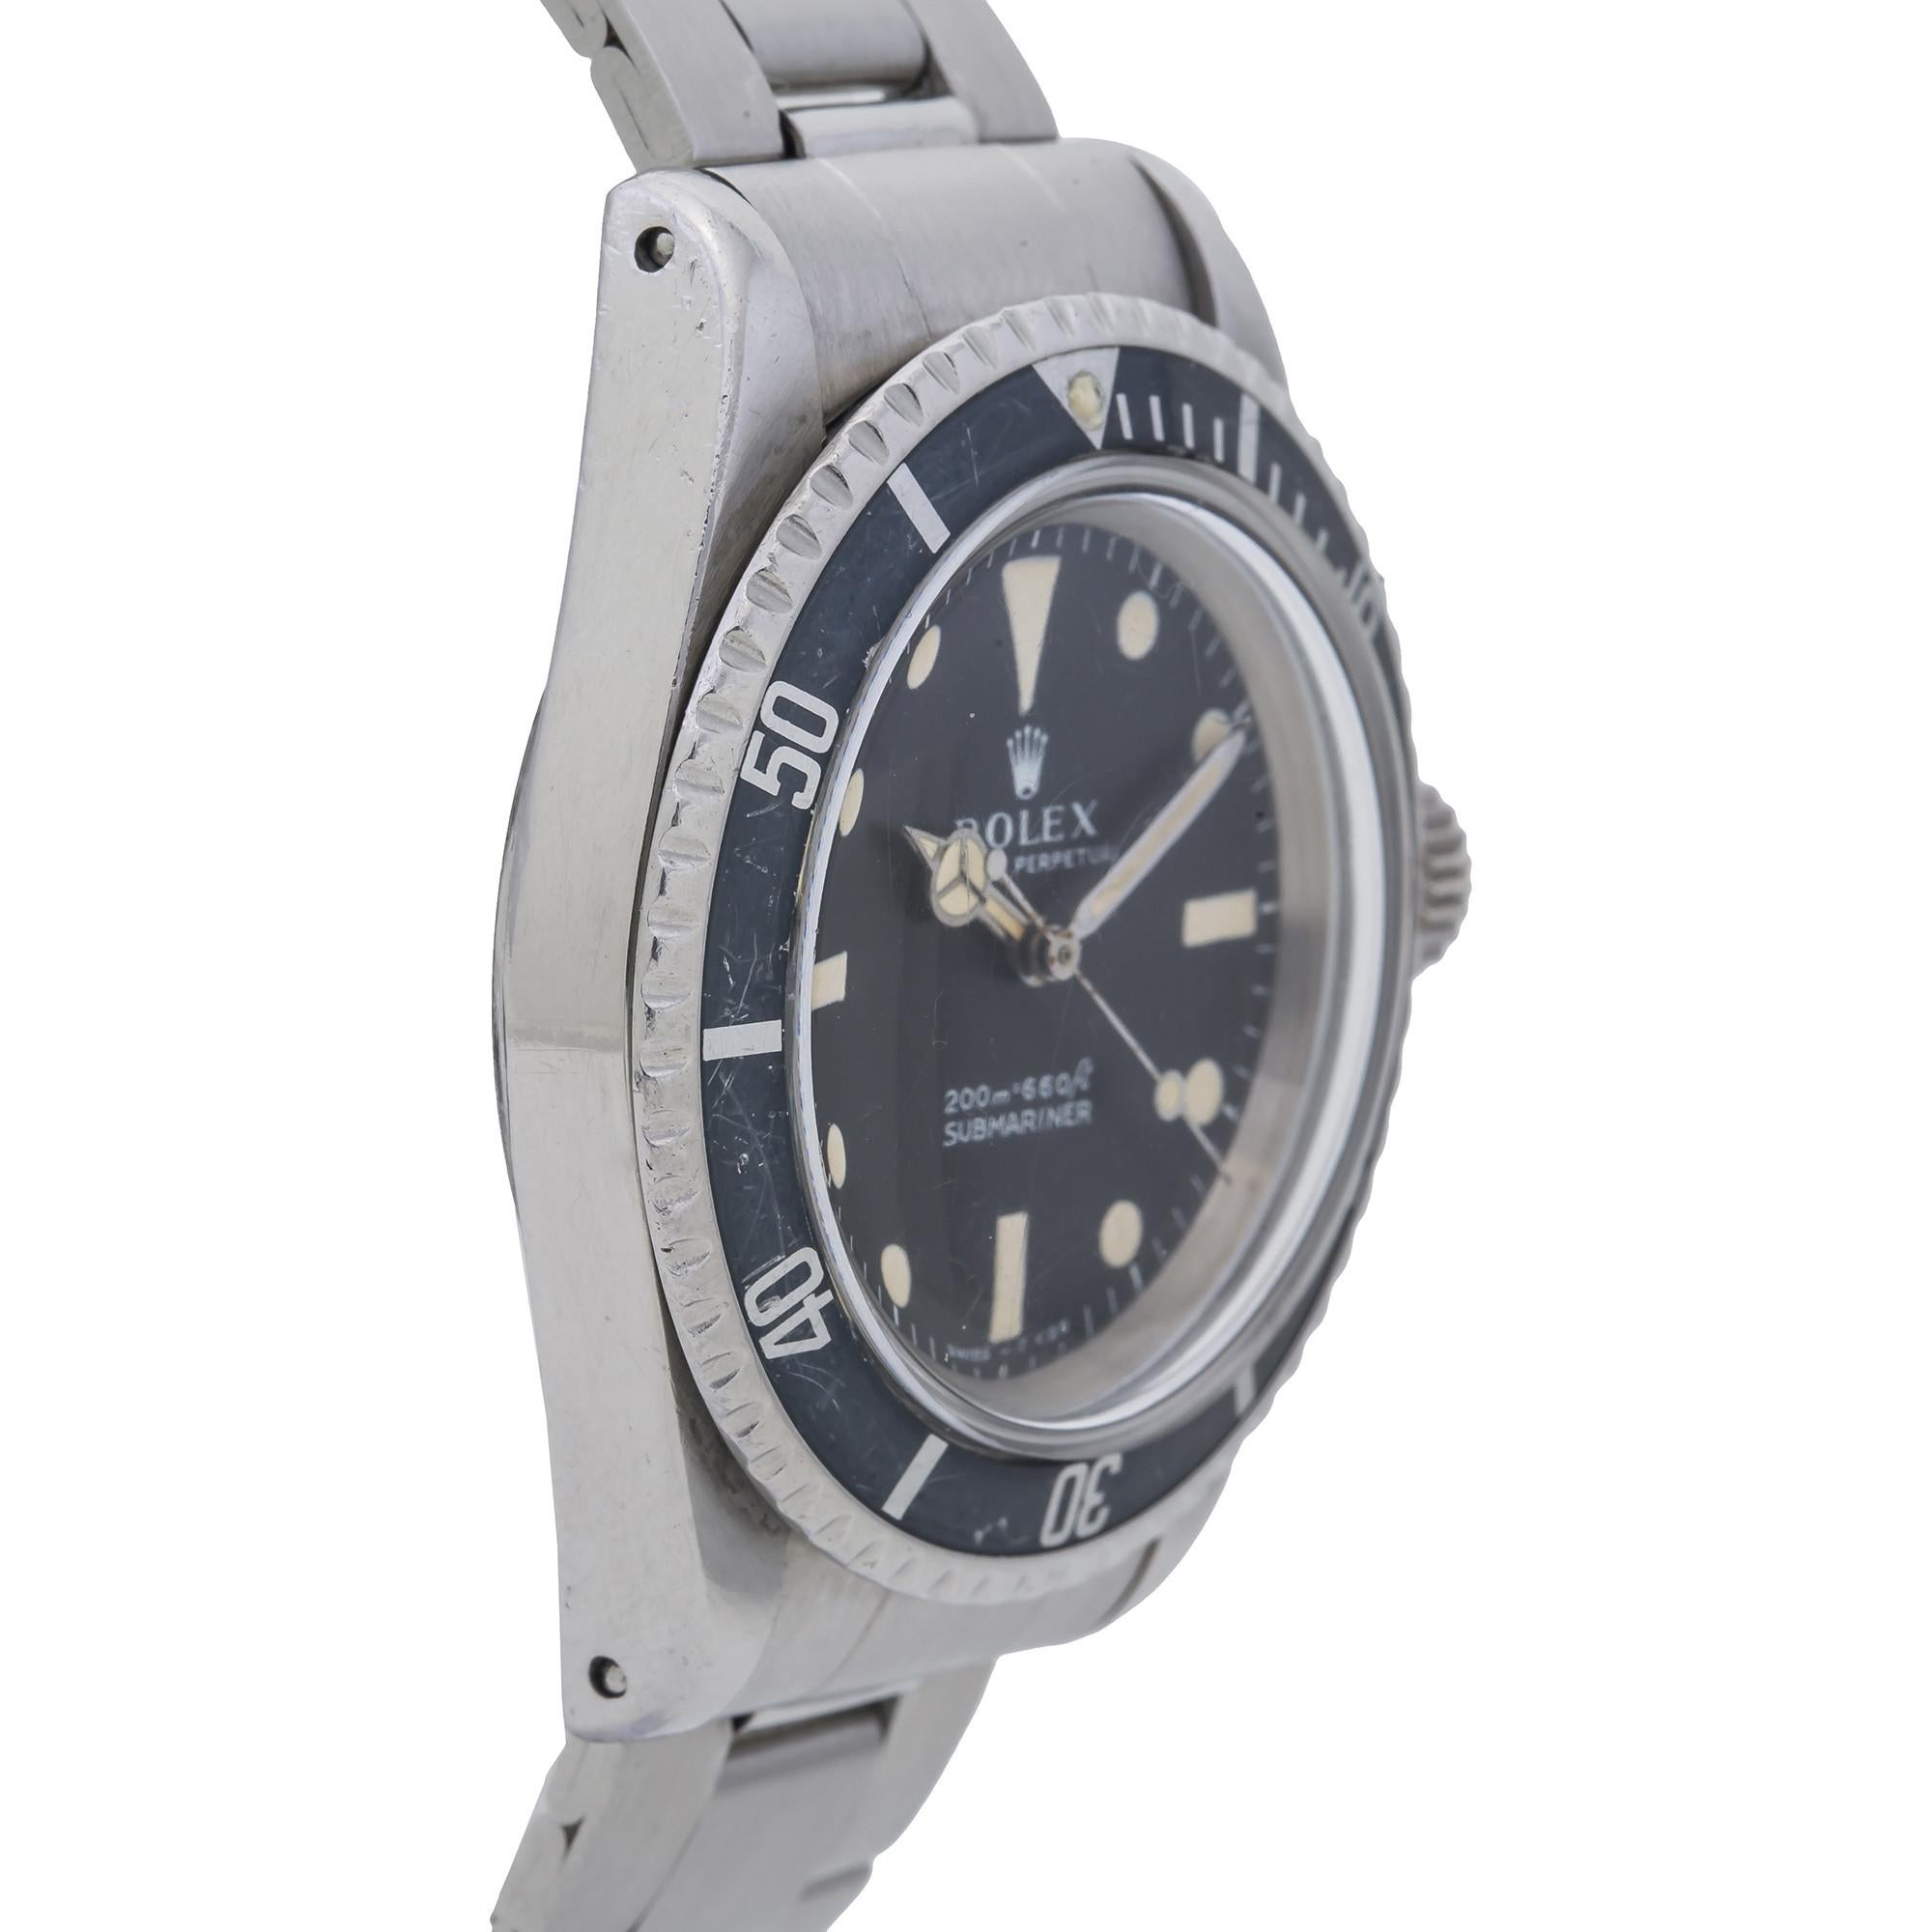 Rolex Submariner 5513, Black Dial, Certified and Warranty 2